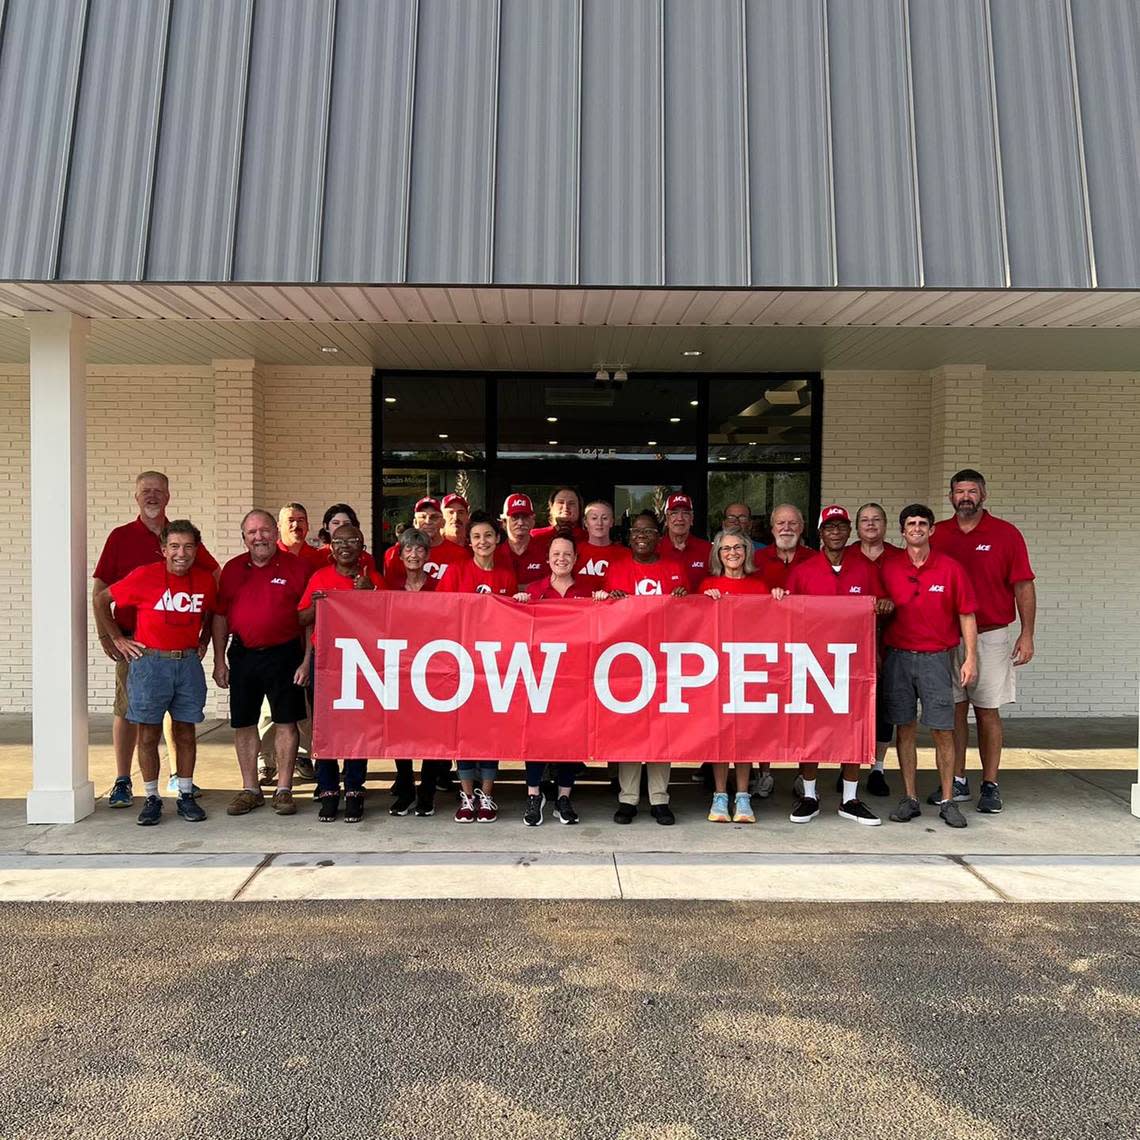 Ace Hardware is now open for business off of Ribaut Road in Port Royal.